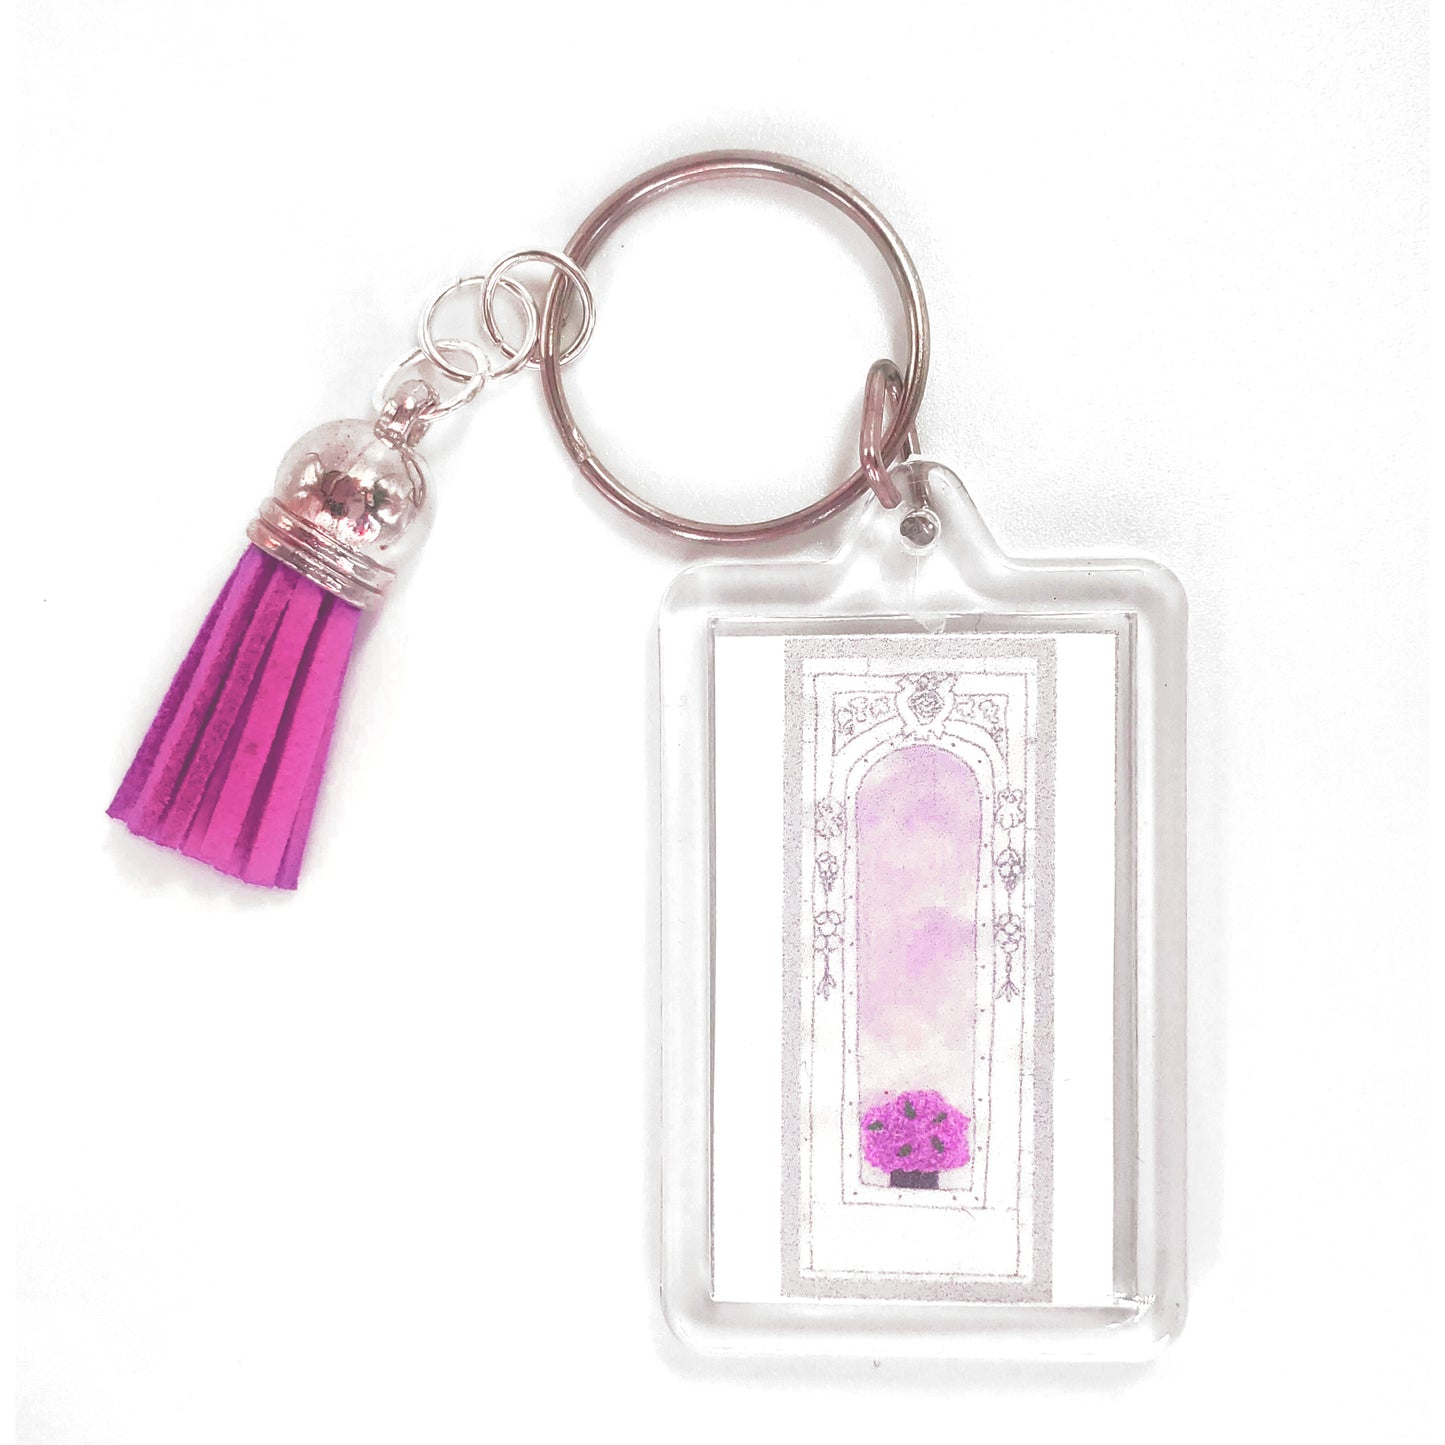 Bright Pink - Flowers in the Window Key Ring